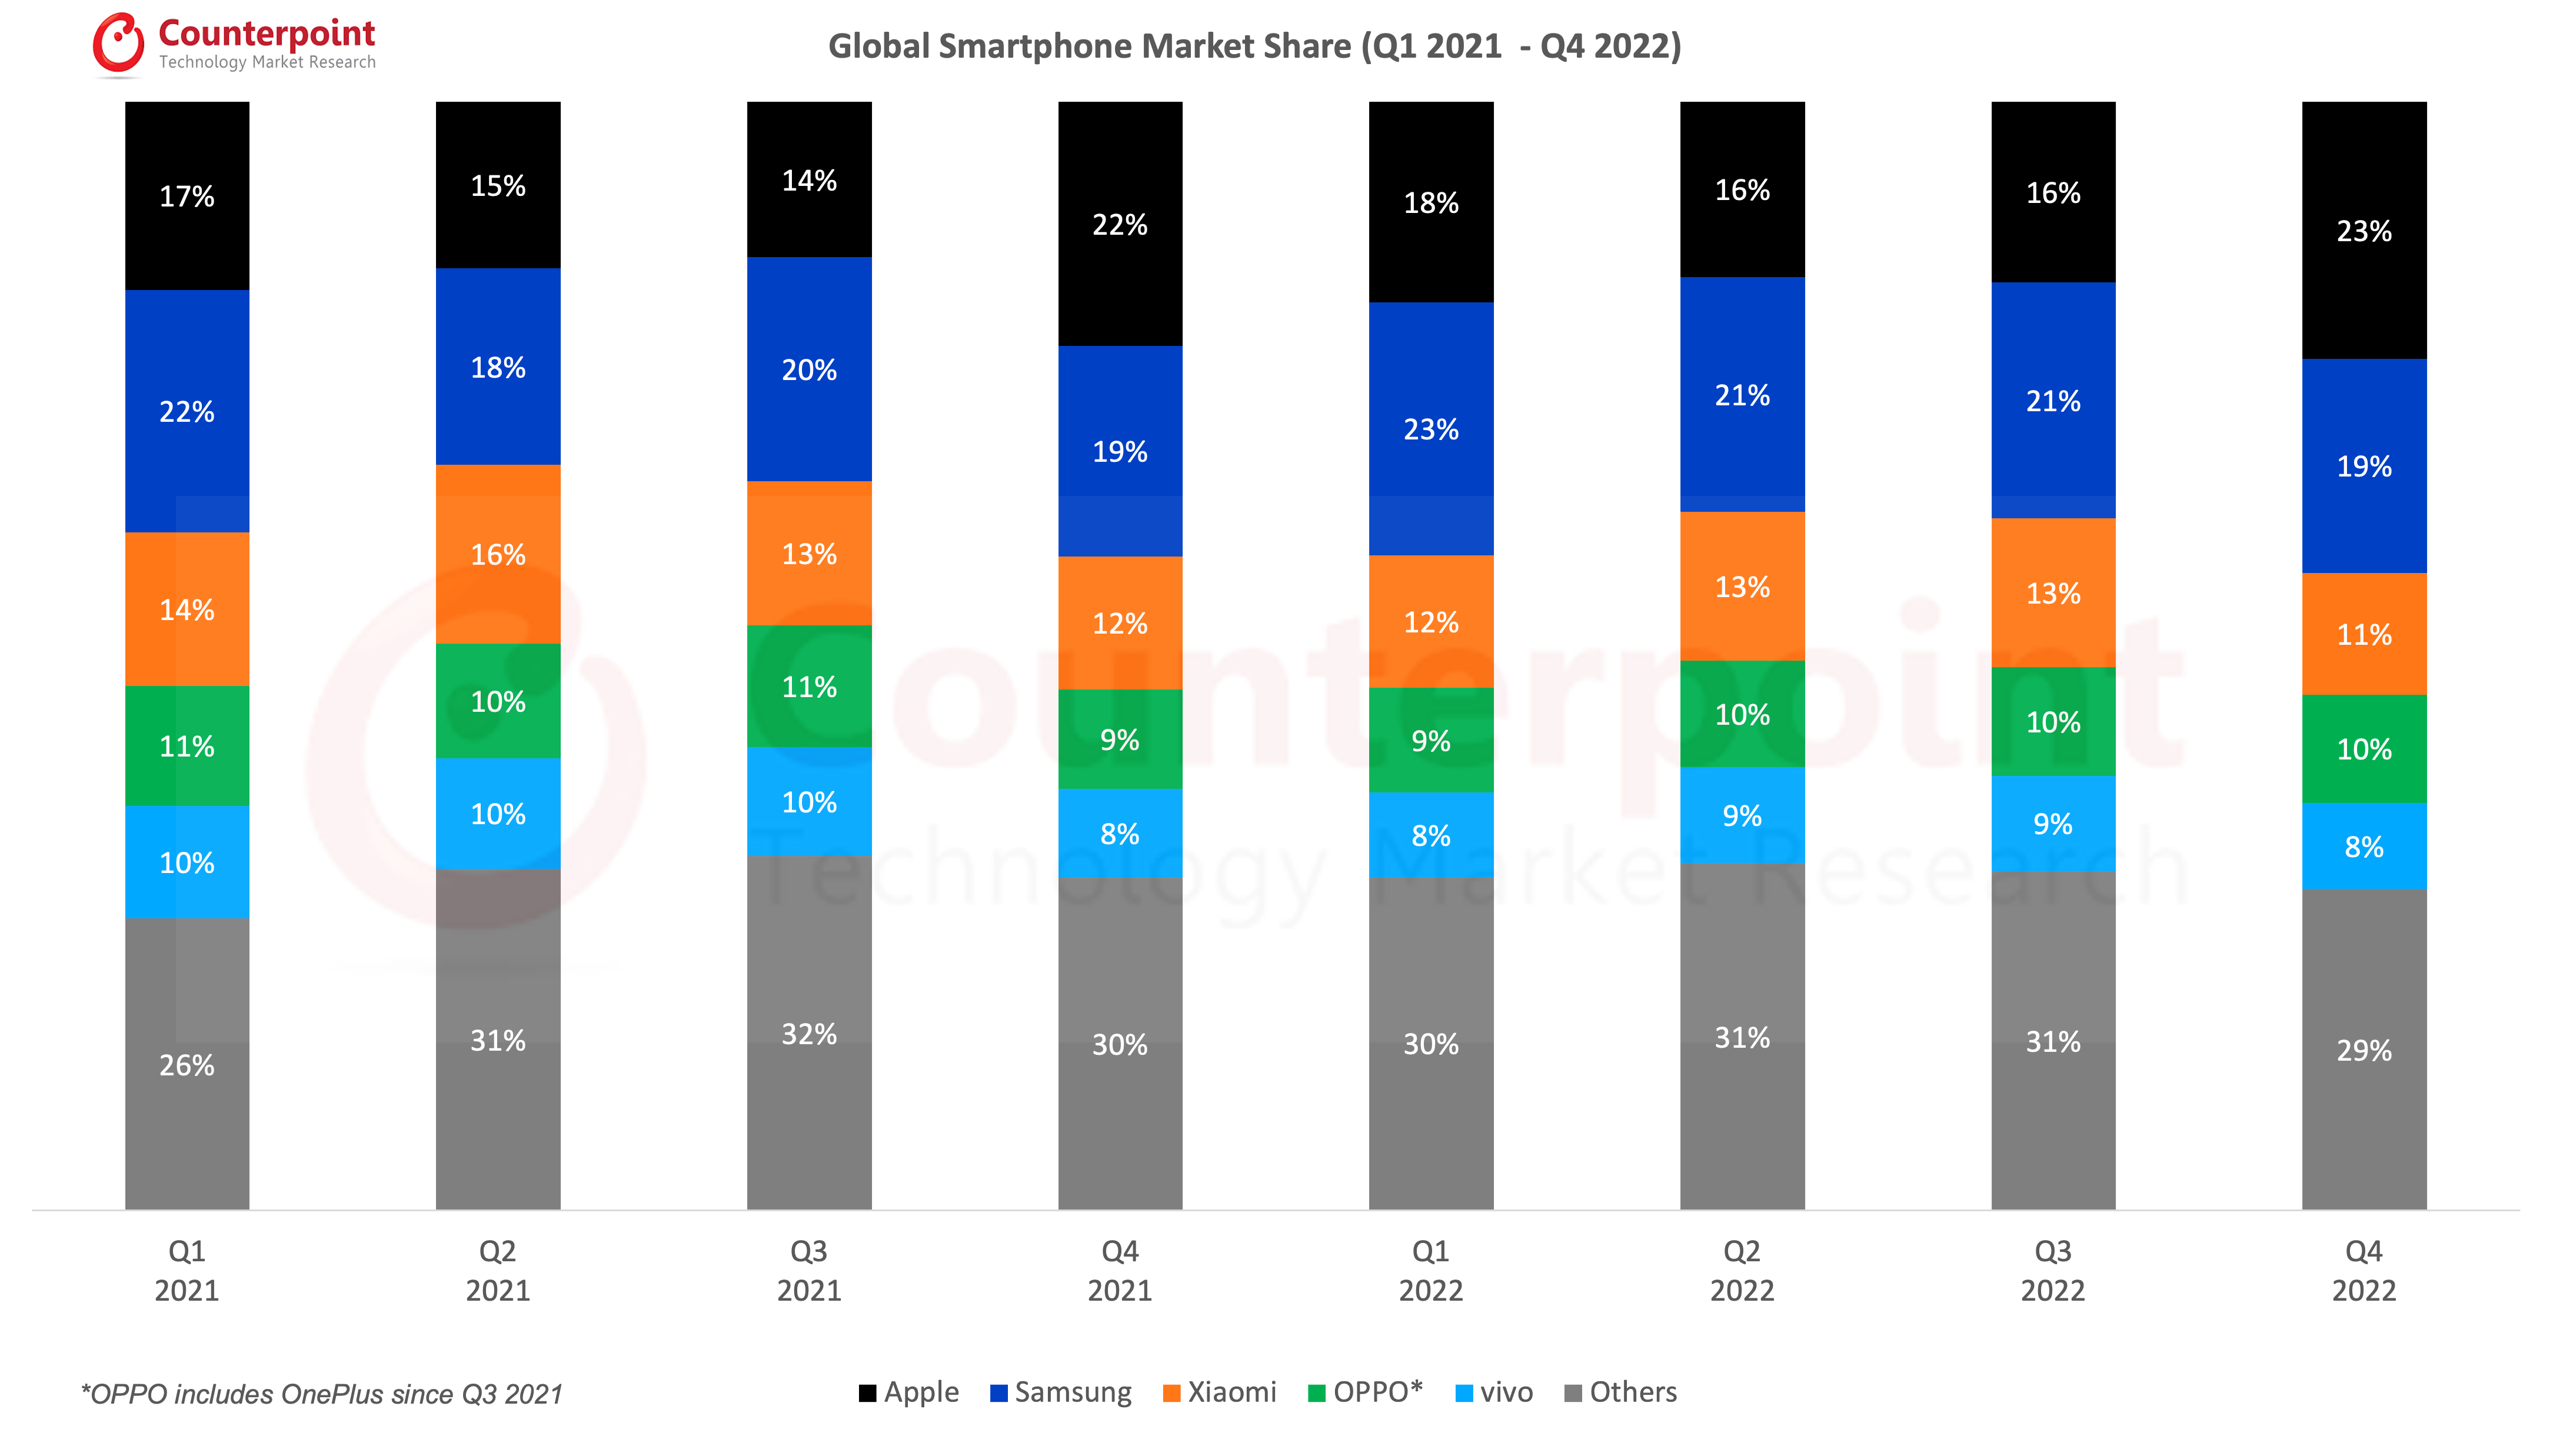 Global Smartphone Market Share By Quarter Counterpoint